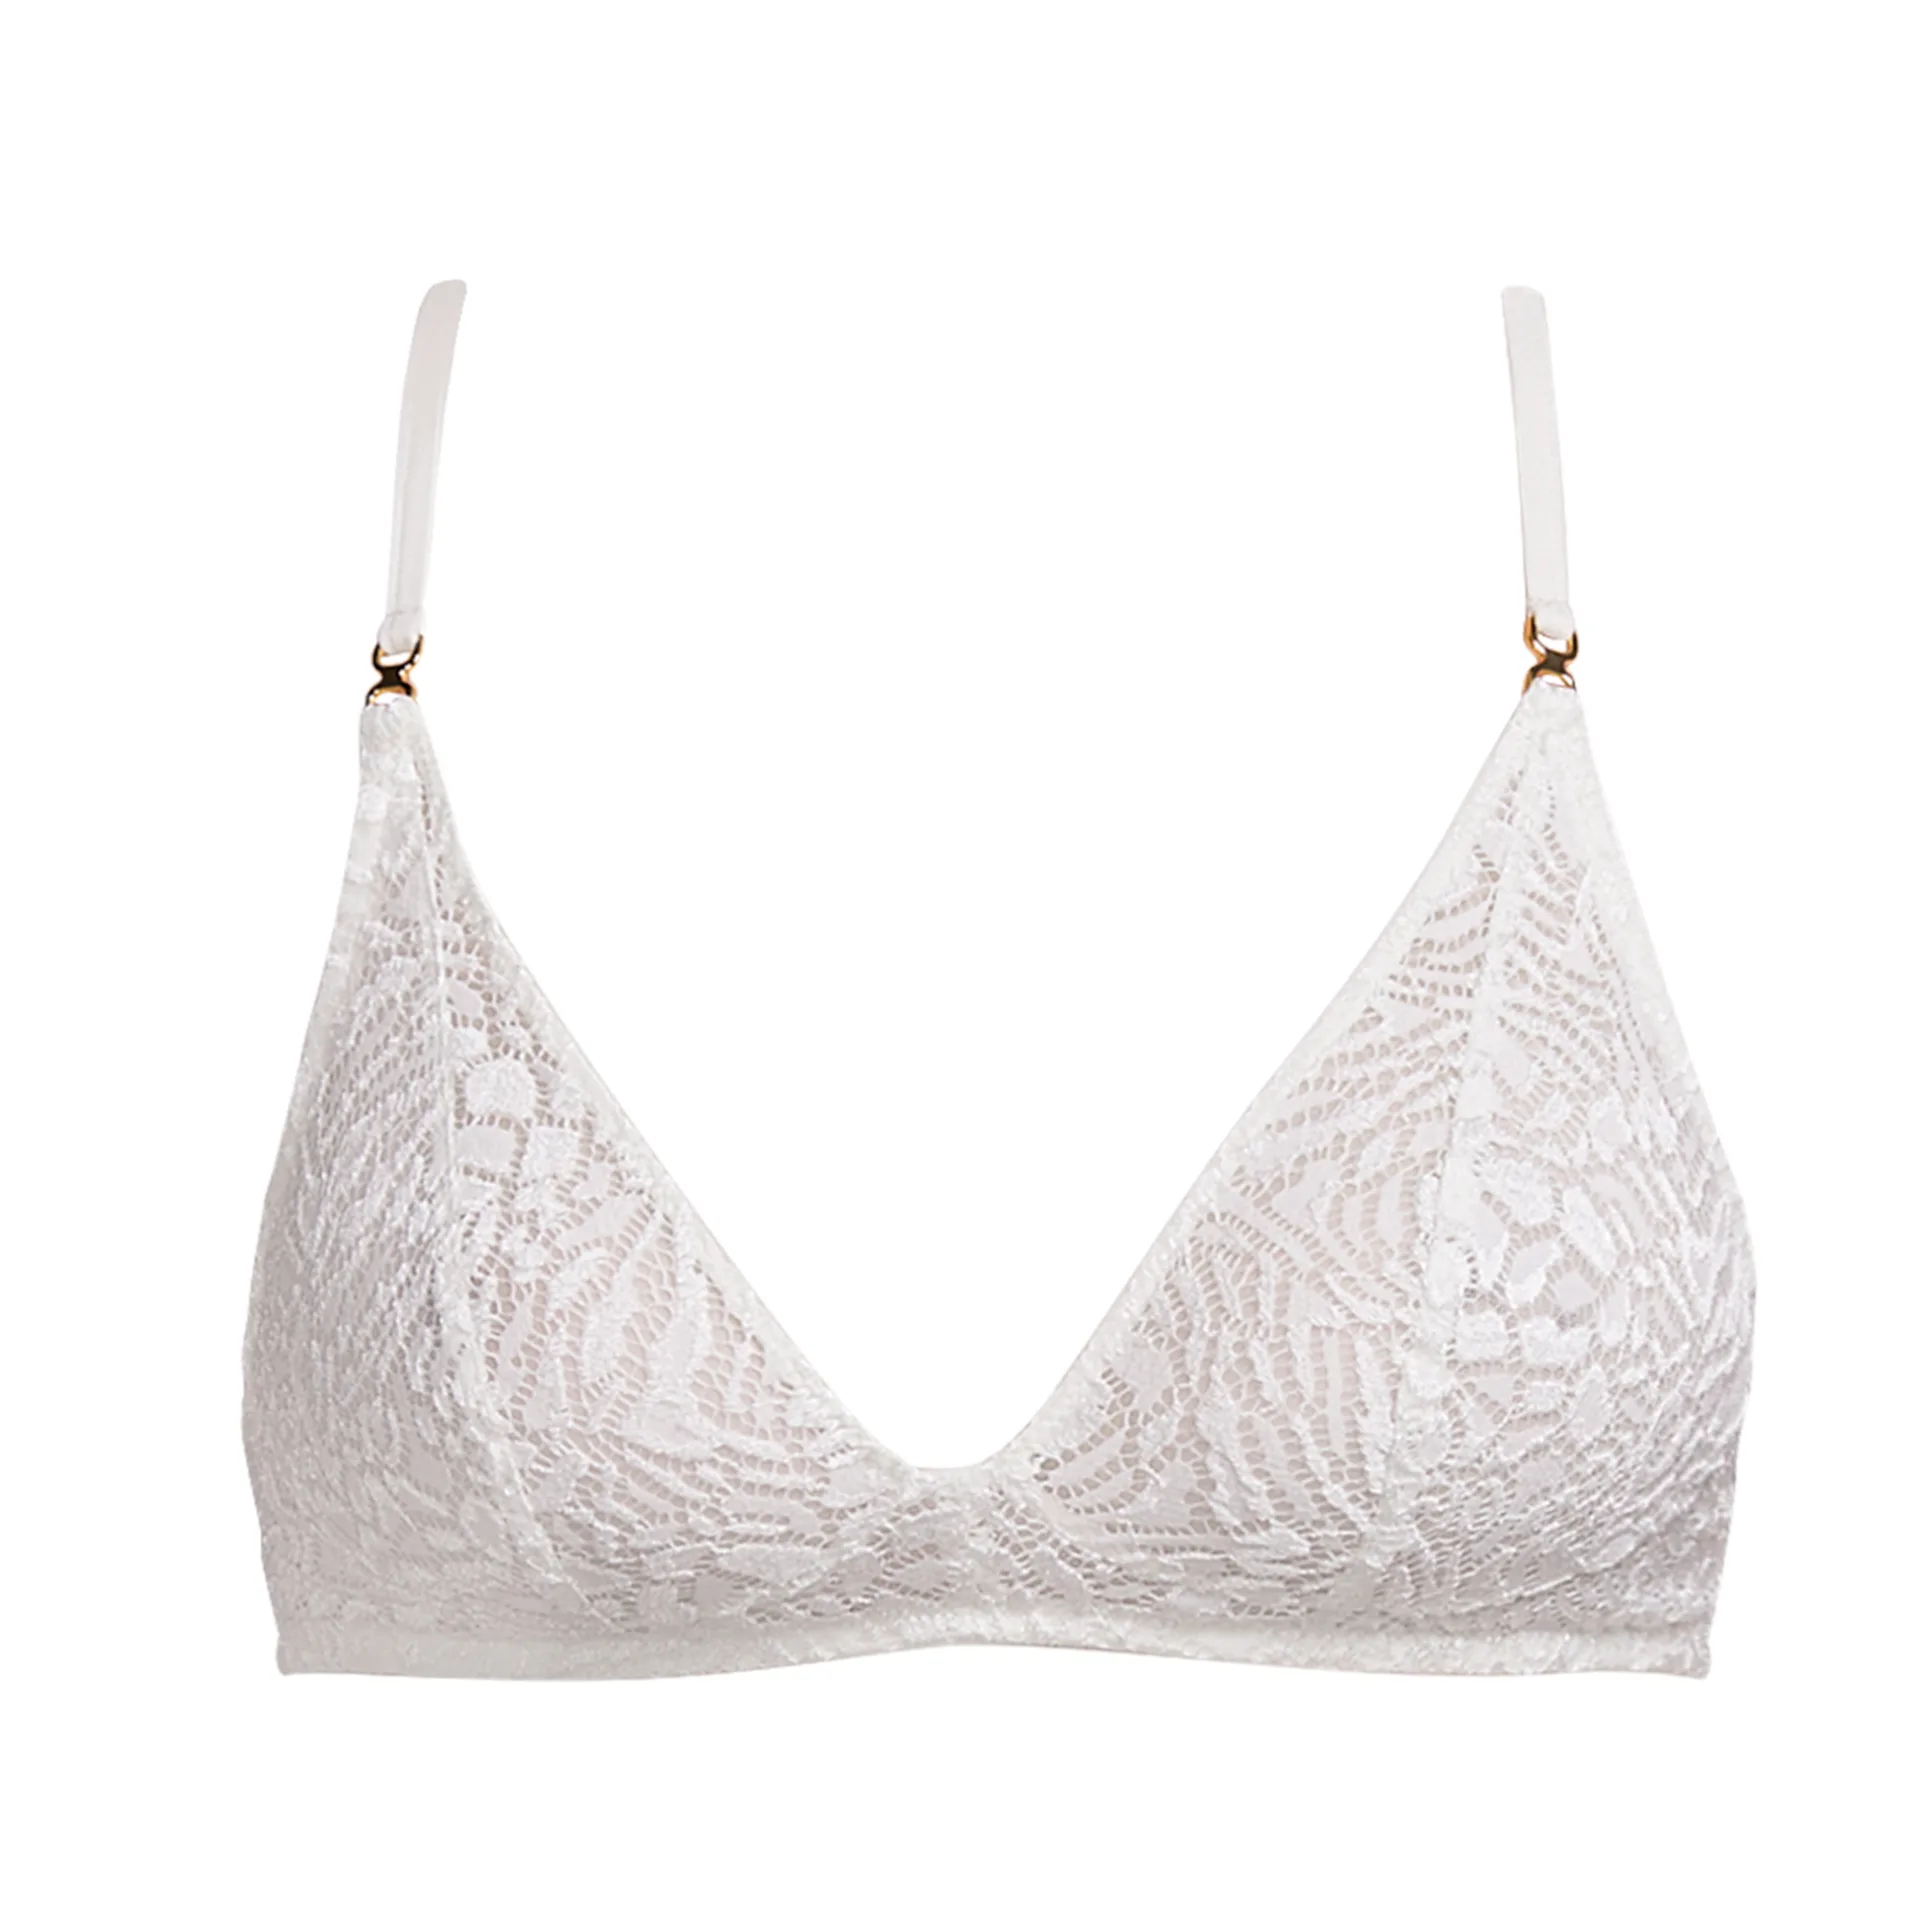 Soft triangle bras, Discover the collection